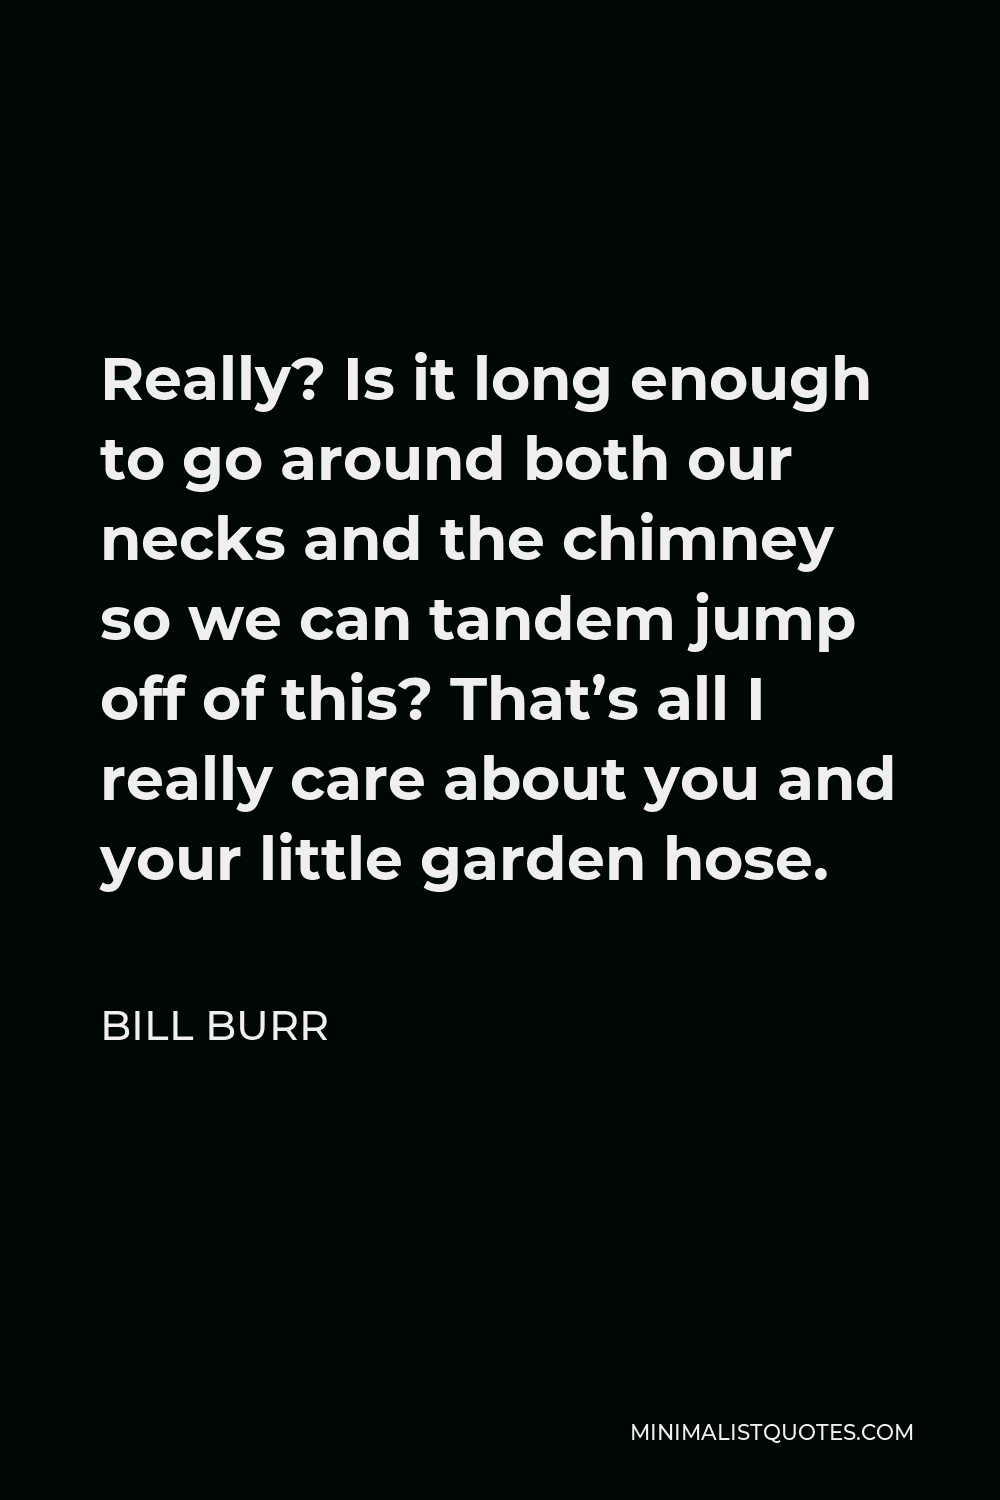 Bill Burr Quote - Really? Is it long enough to go around both our necks and the chimney so we can tandem jump off of this? That’s all I really care about you and your little garden hose.